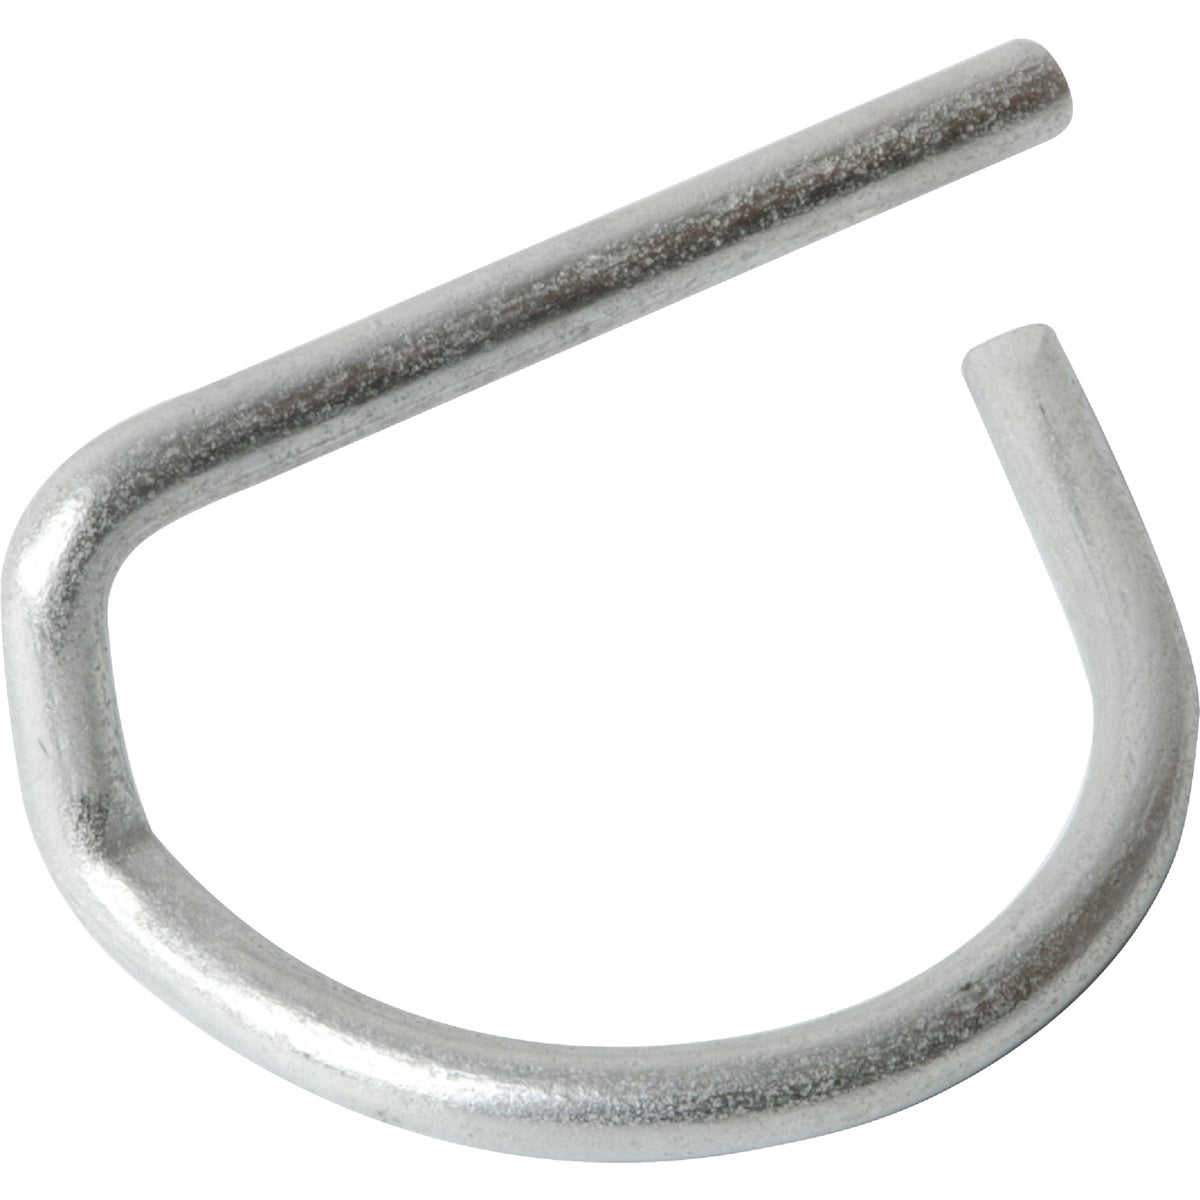 Item 771079, This MetalTech pig tail locking device is an essential item for stacking 